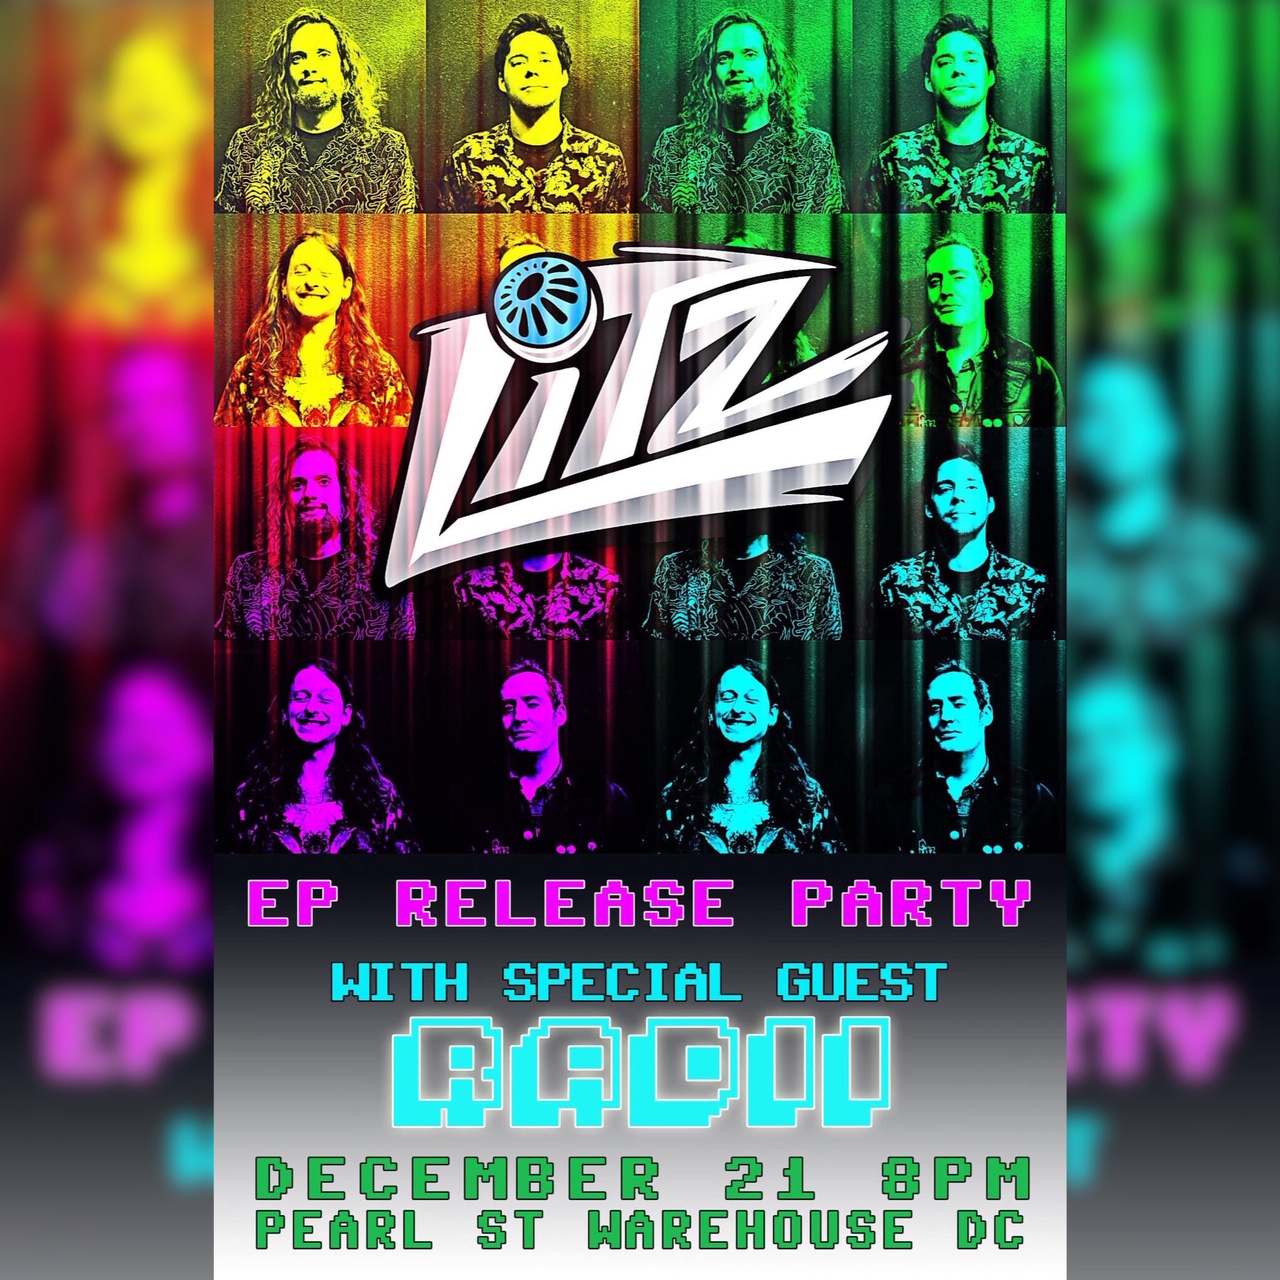 LITZ New Single “Summertime Blues” Released Today – Listen Now! – EP Release Party Dec. 21